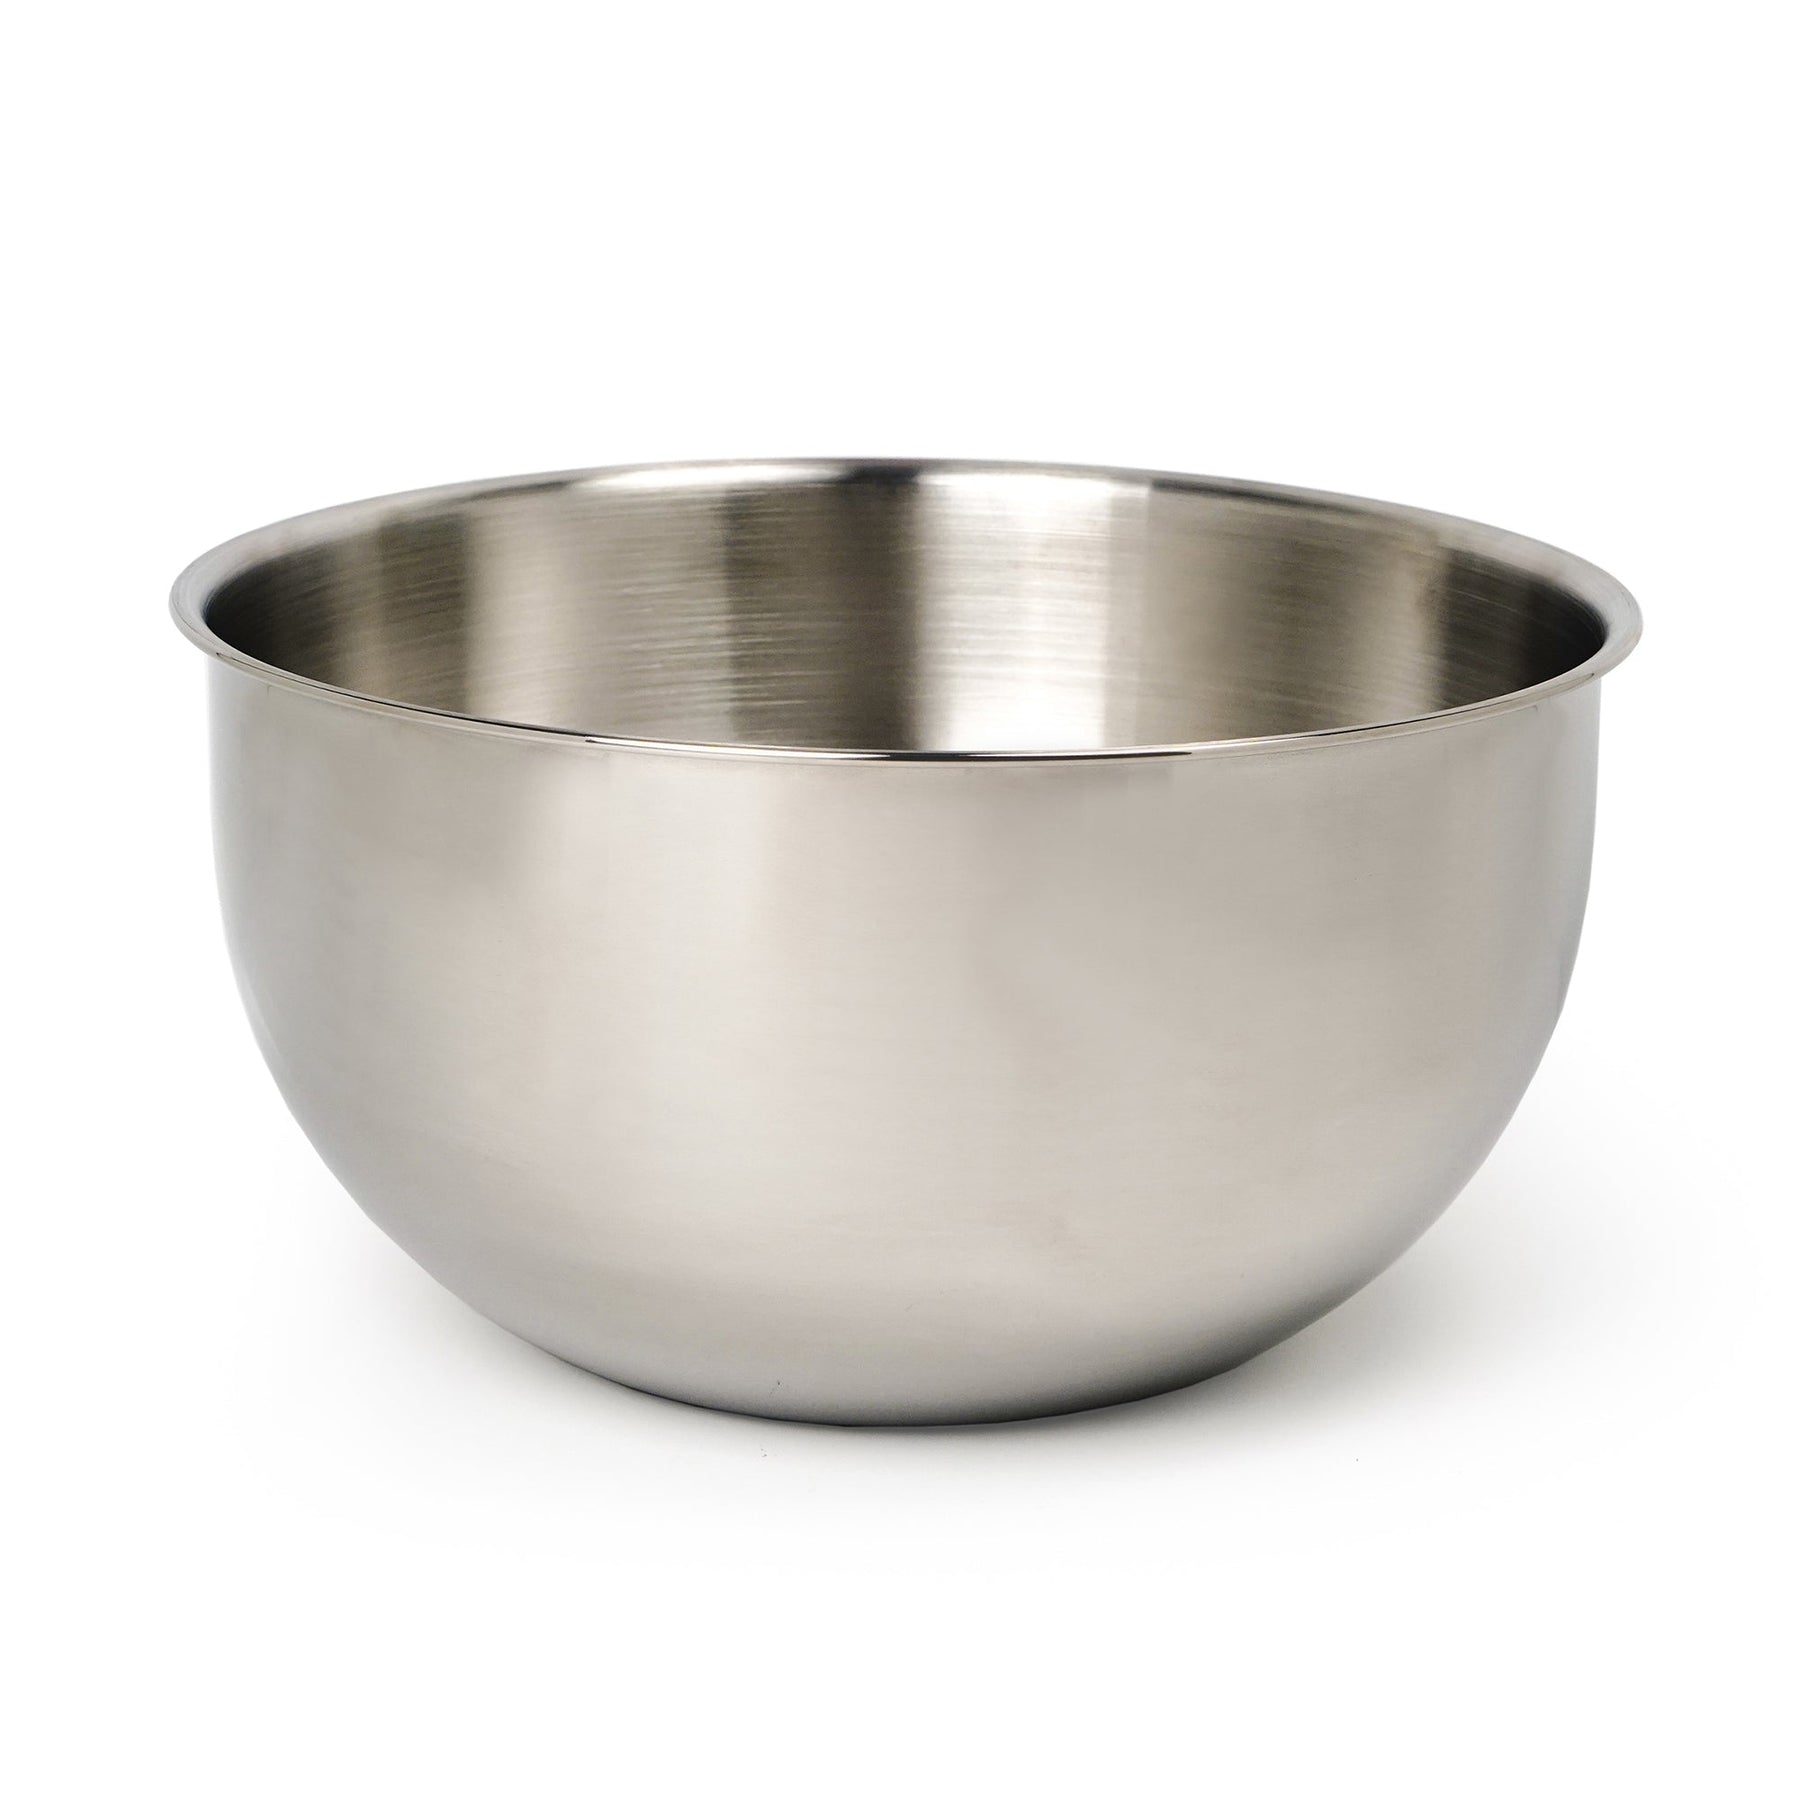 8 Qt Mixing Bowl - Stainless Steel – RSVP International